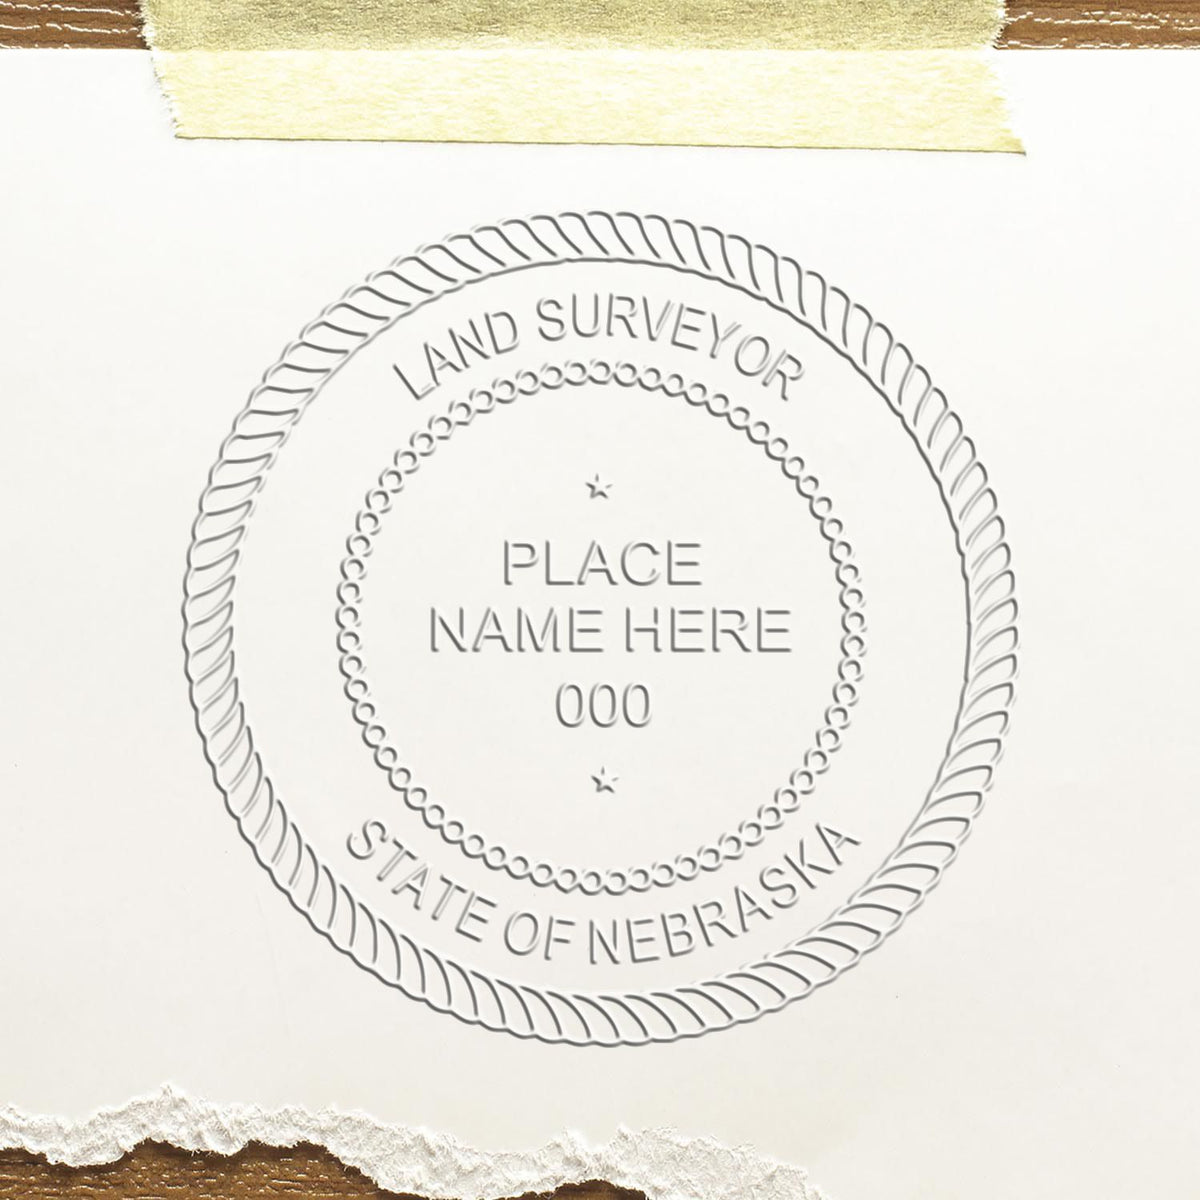 A lifestyle photo showing a stamped image of the State of Nebraska Soft Land Surveyor Embossing Seal on a piece of paper